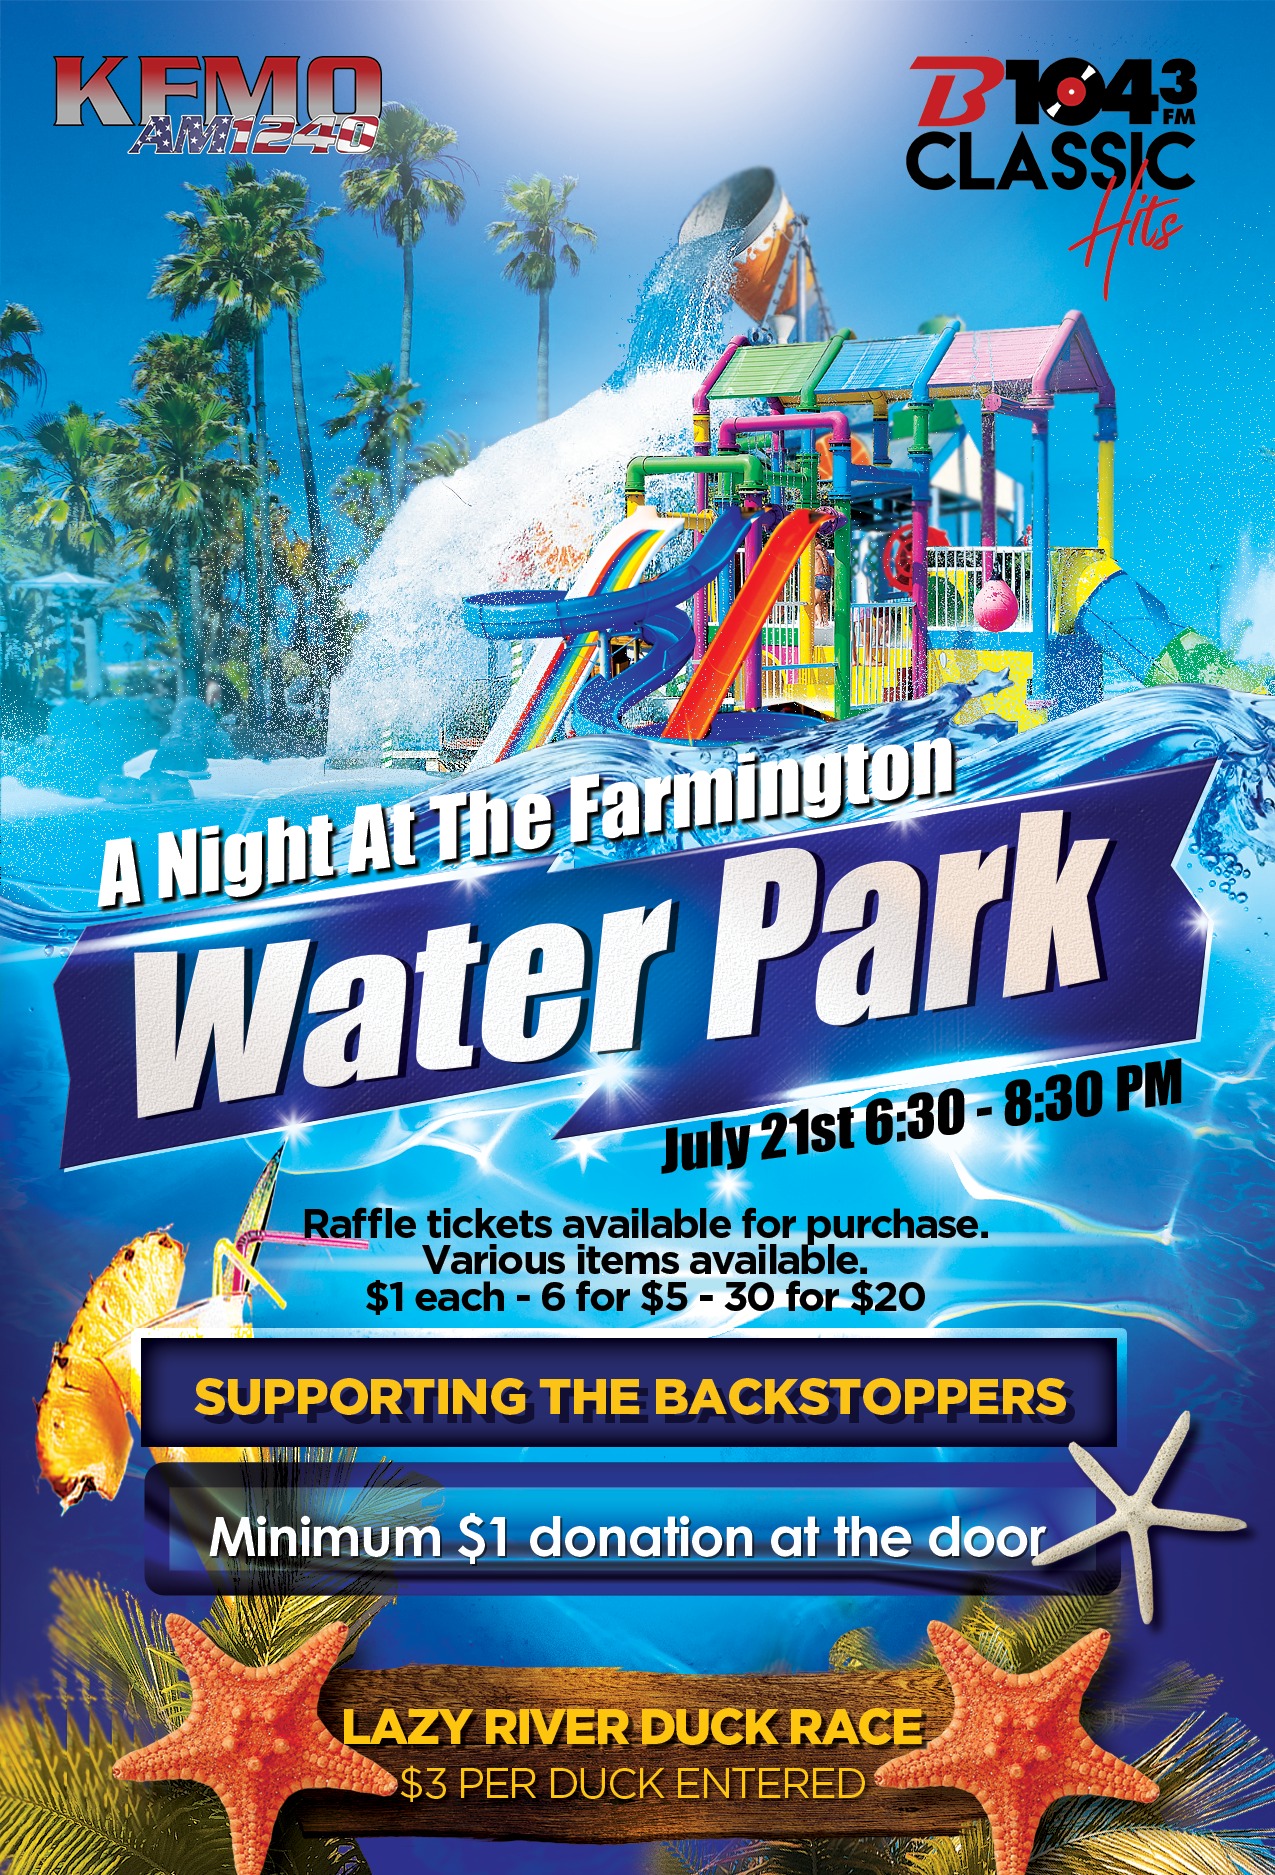 Waterpark Night To Raise Funds For Back Stoppers